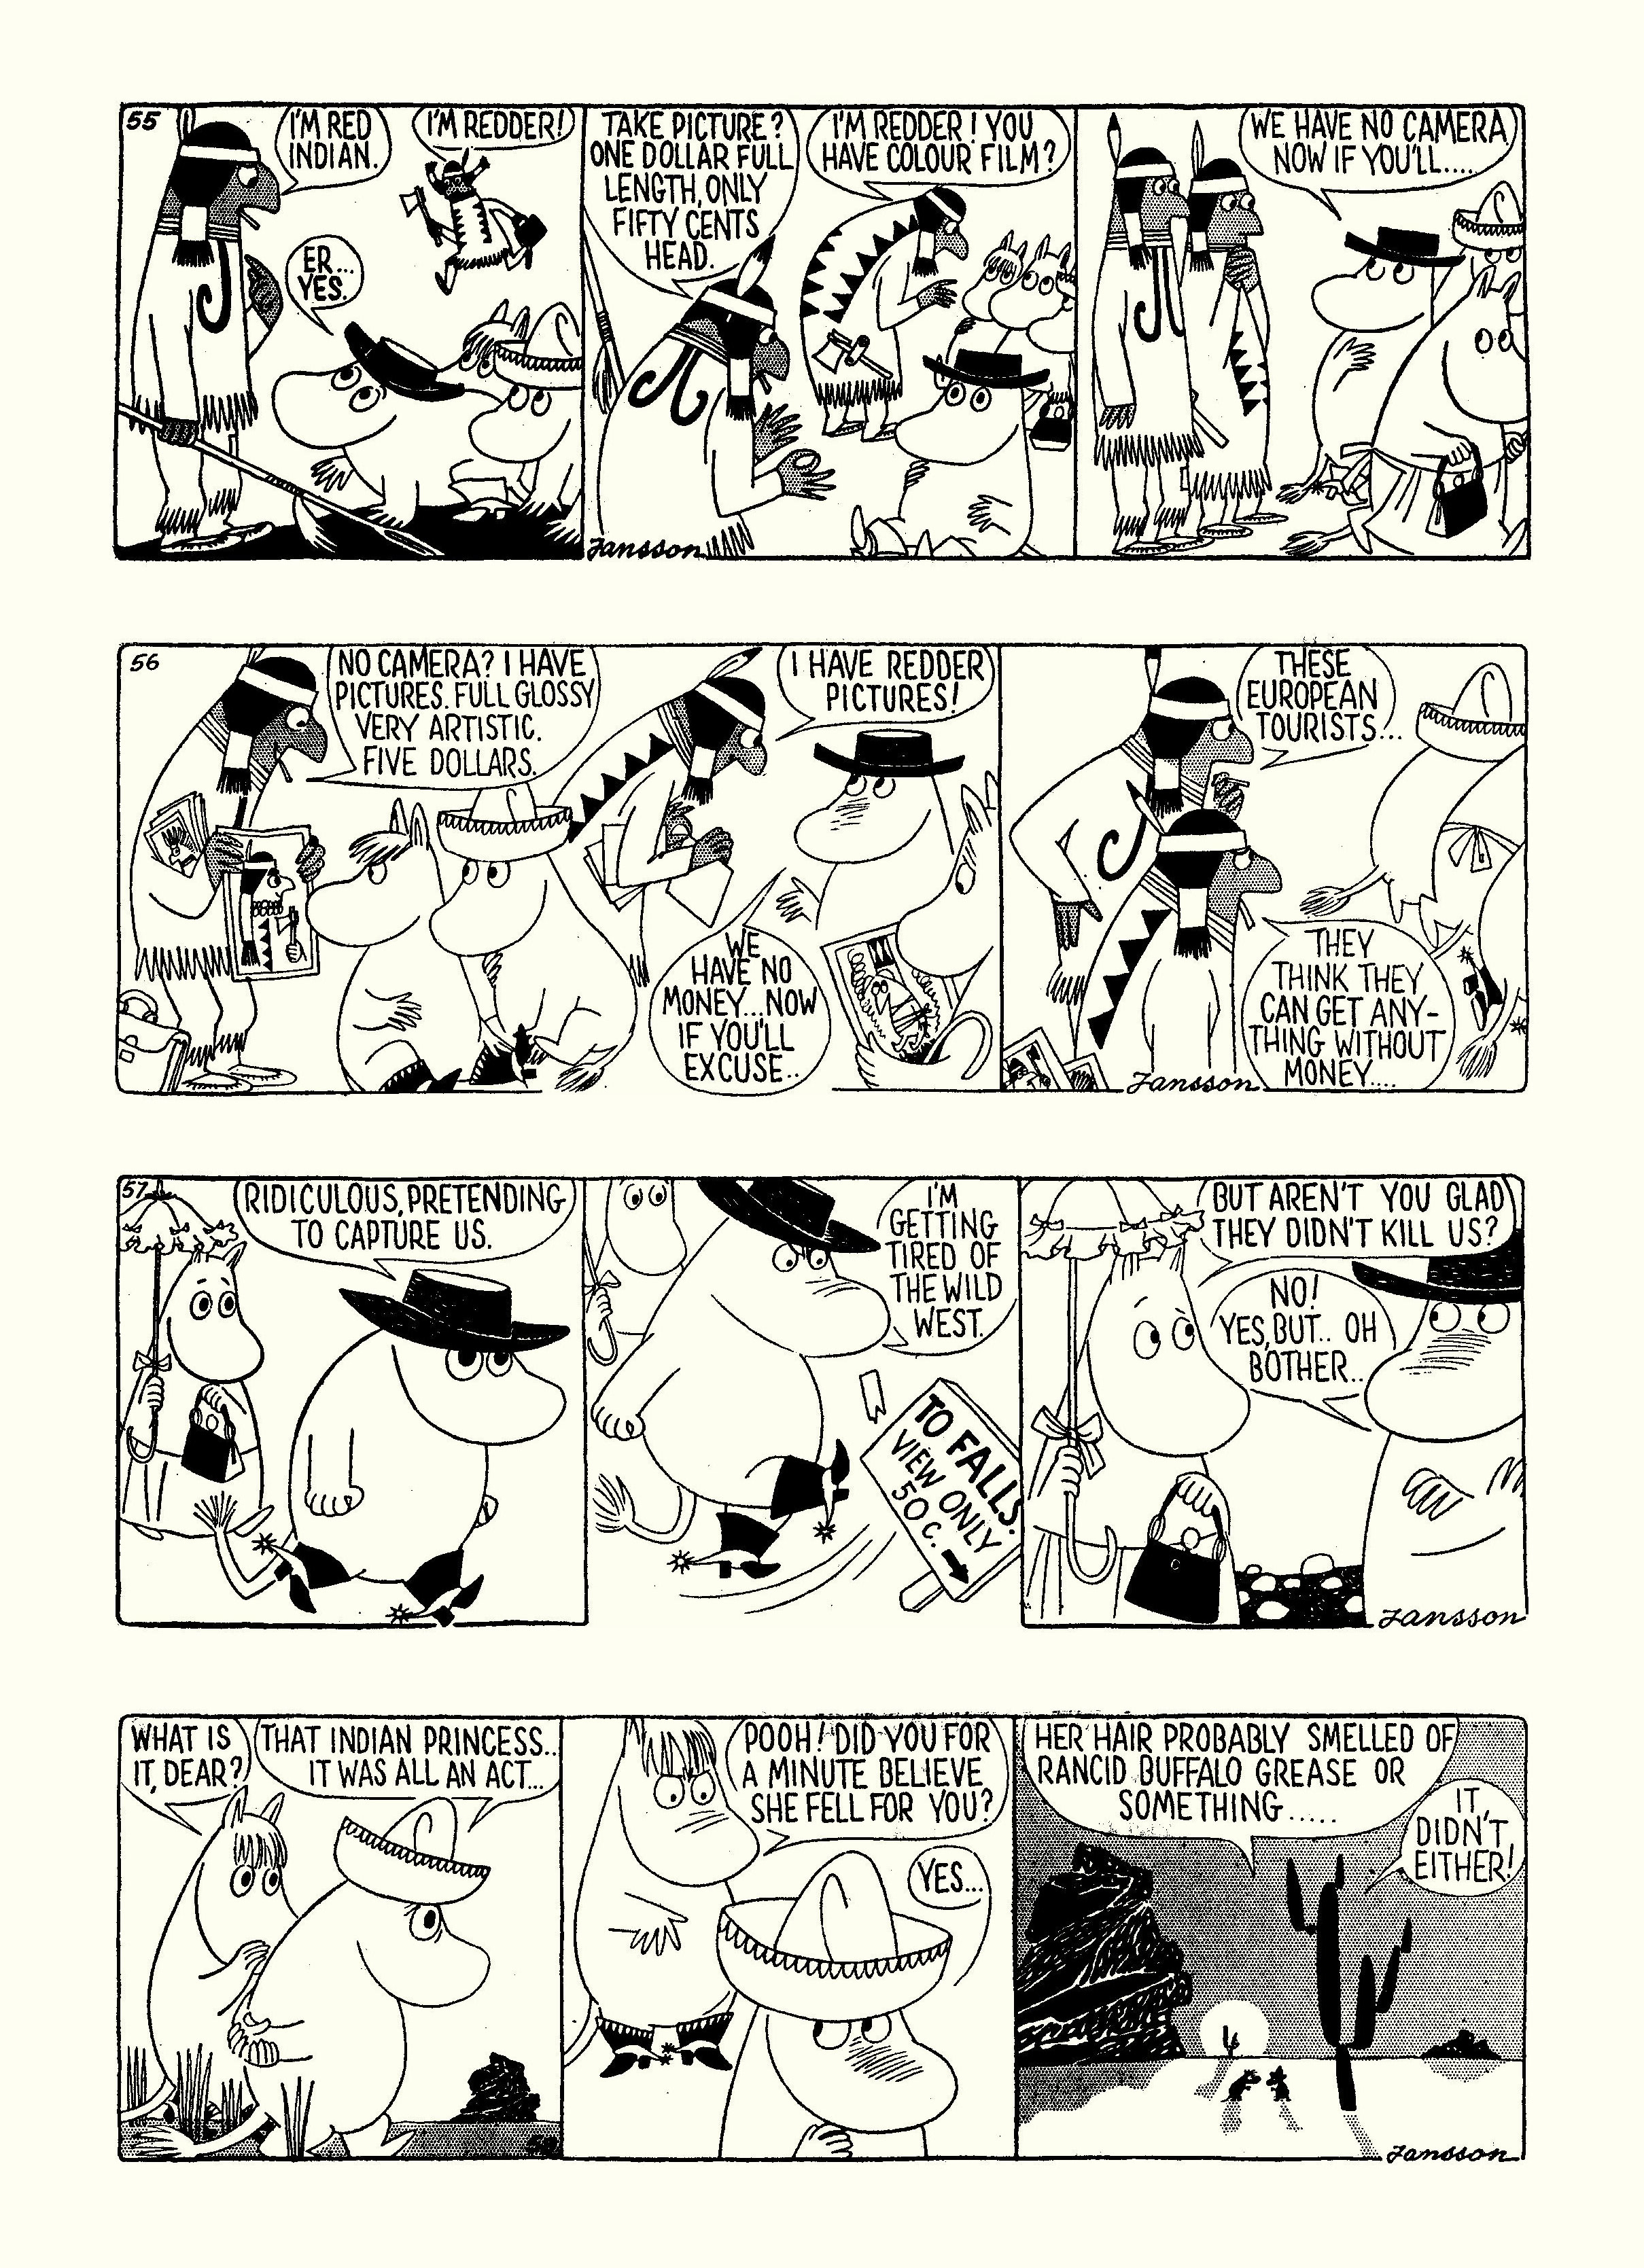 Read online Moomin: The Complete Tove Jansson Comic Strip comic -  Issue # TPB 4 - 20